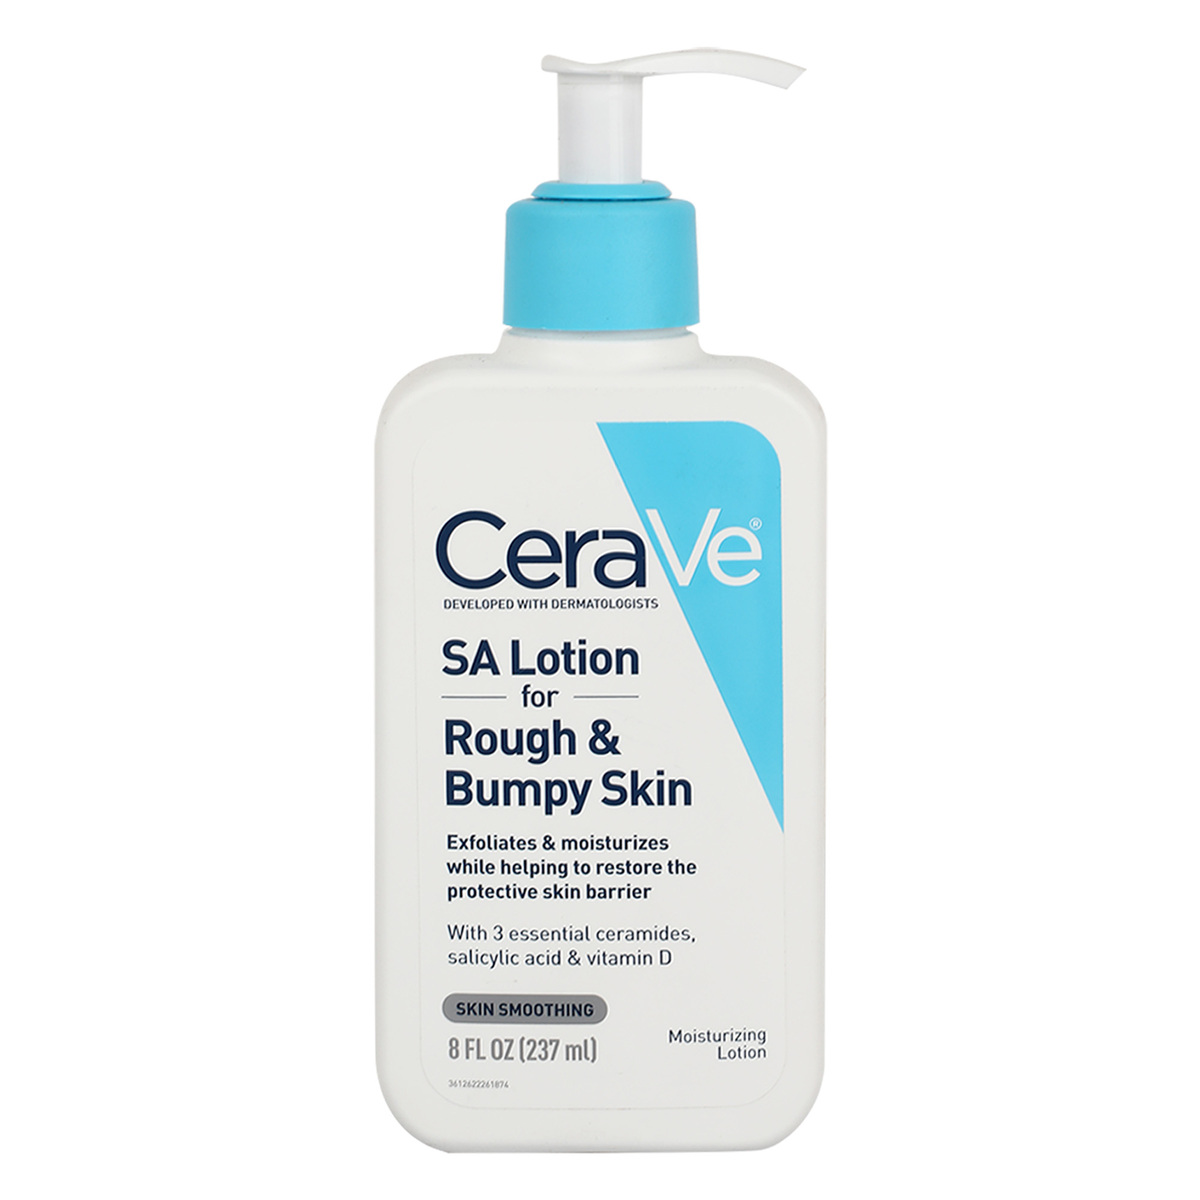 CeraVe SA Lotion for Rough and Bumpy Skin Smoothing, 237 ml